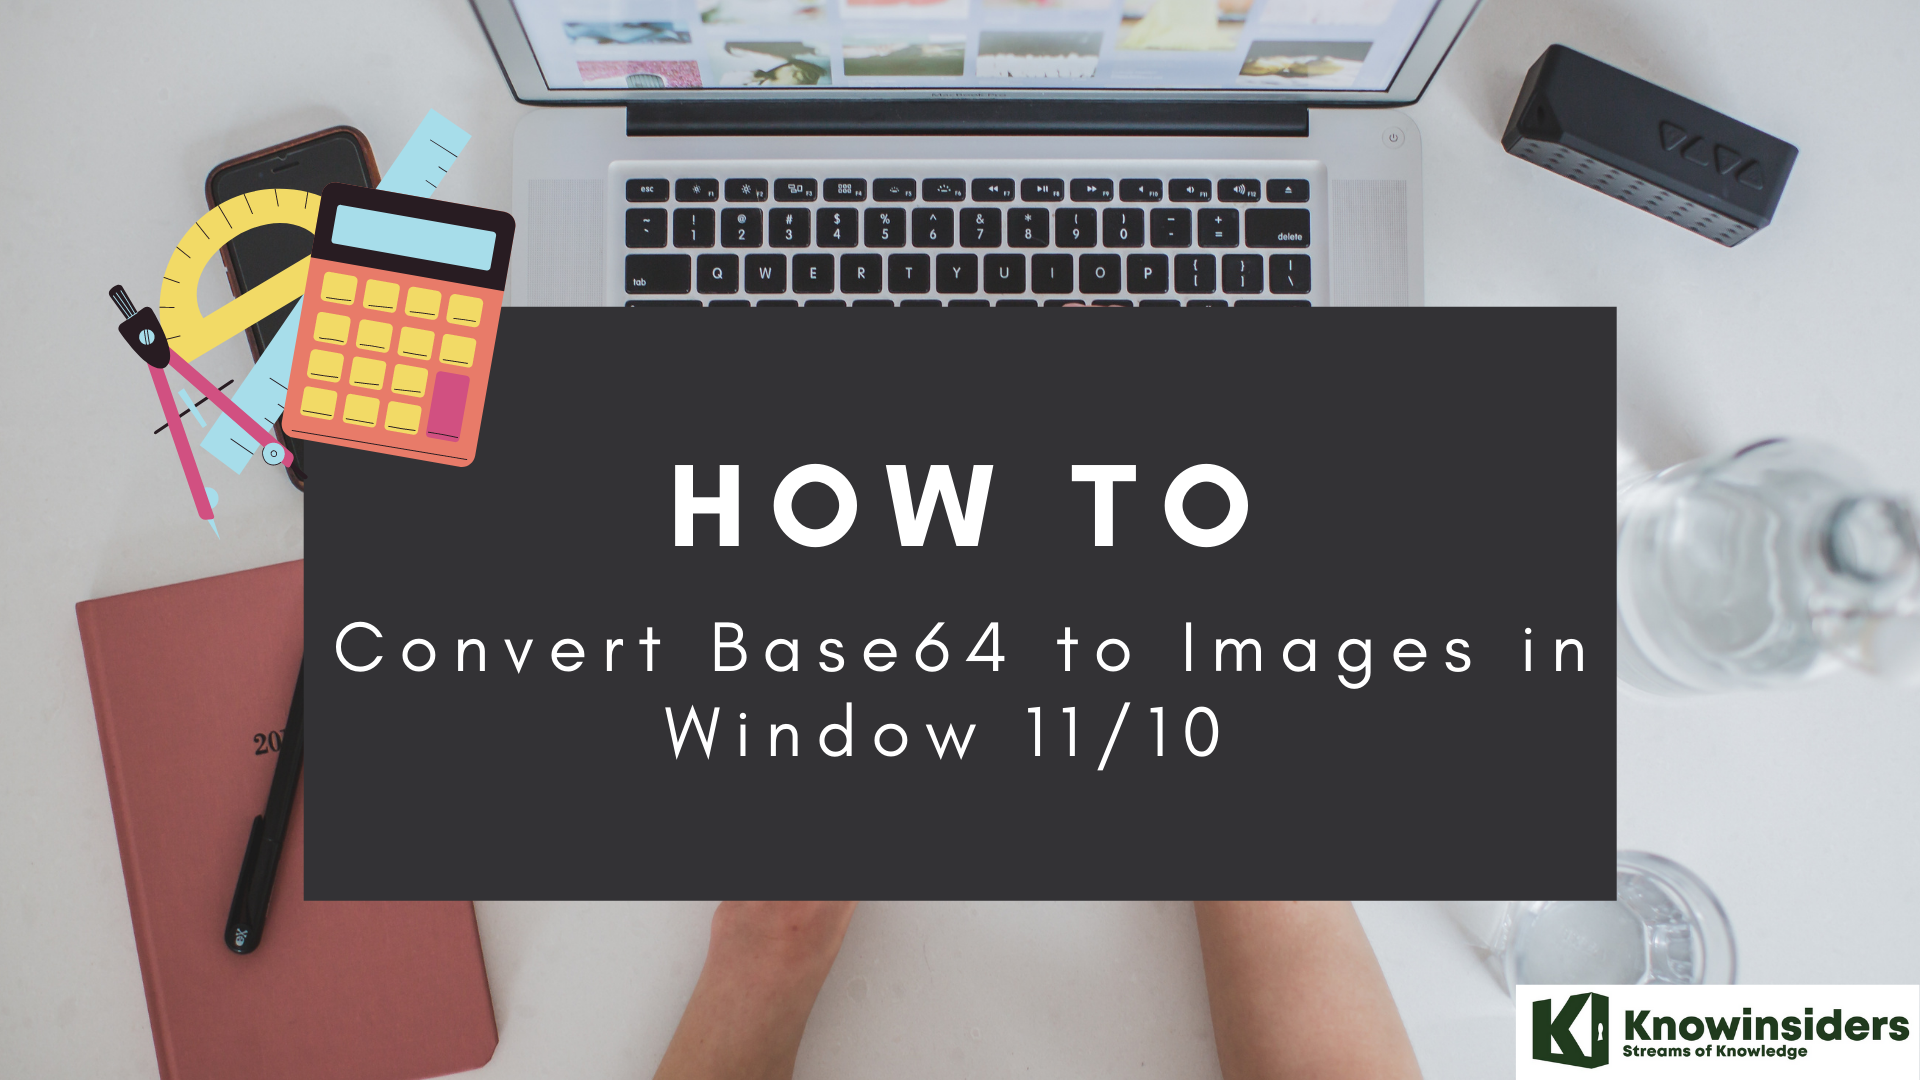 The Best Ways To Convert Base64 to Image on Windows 11/10